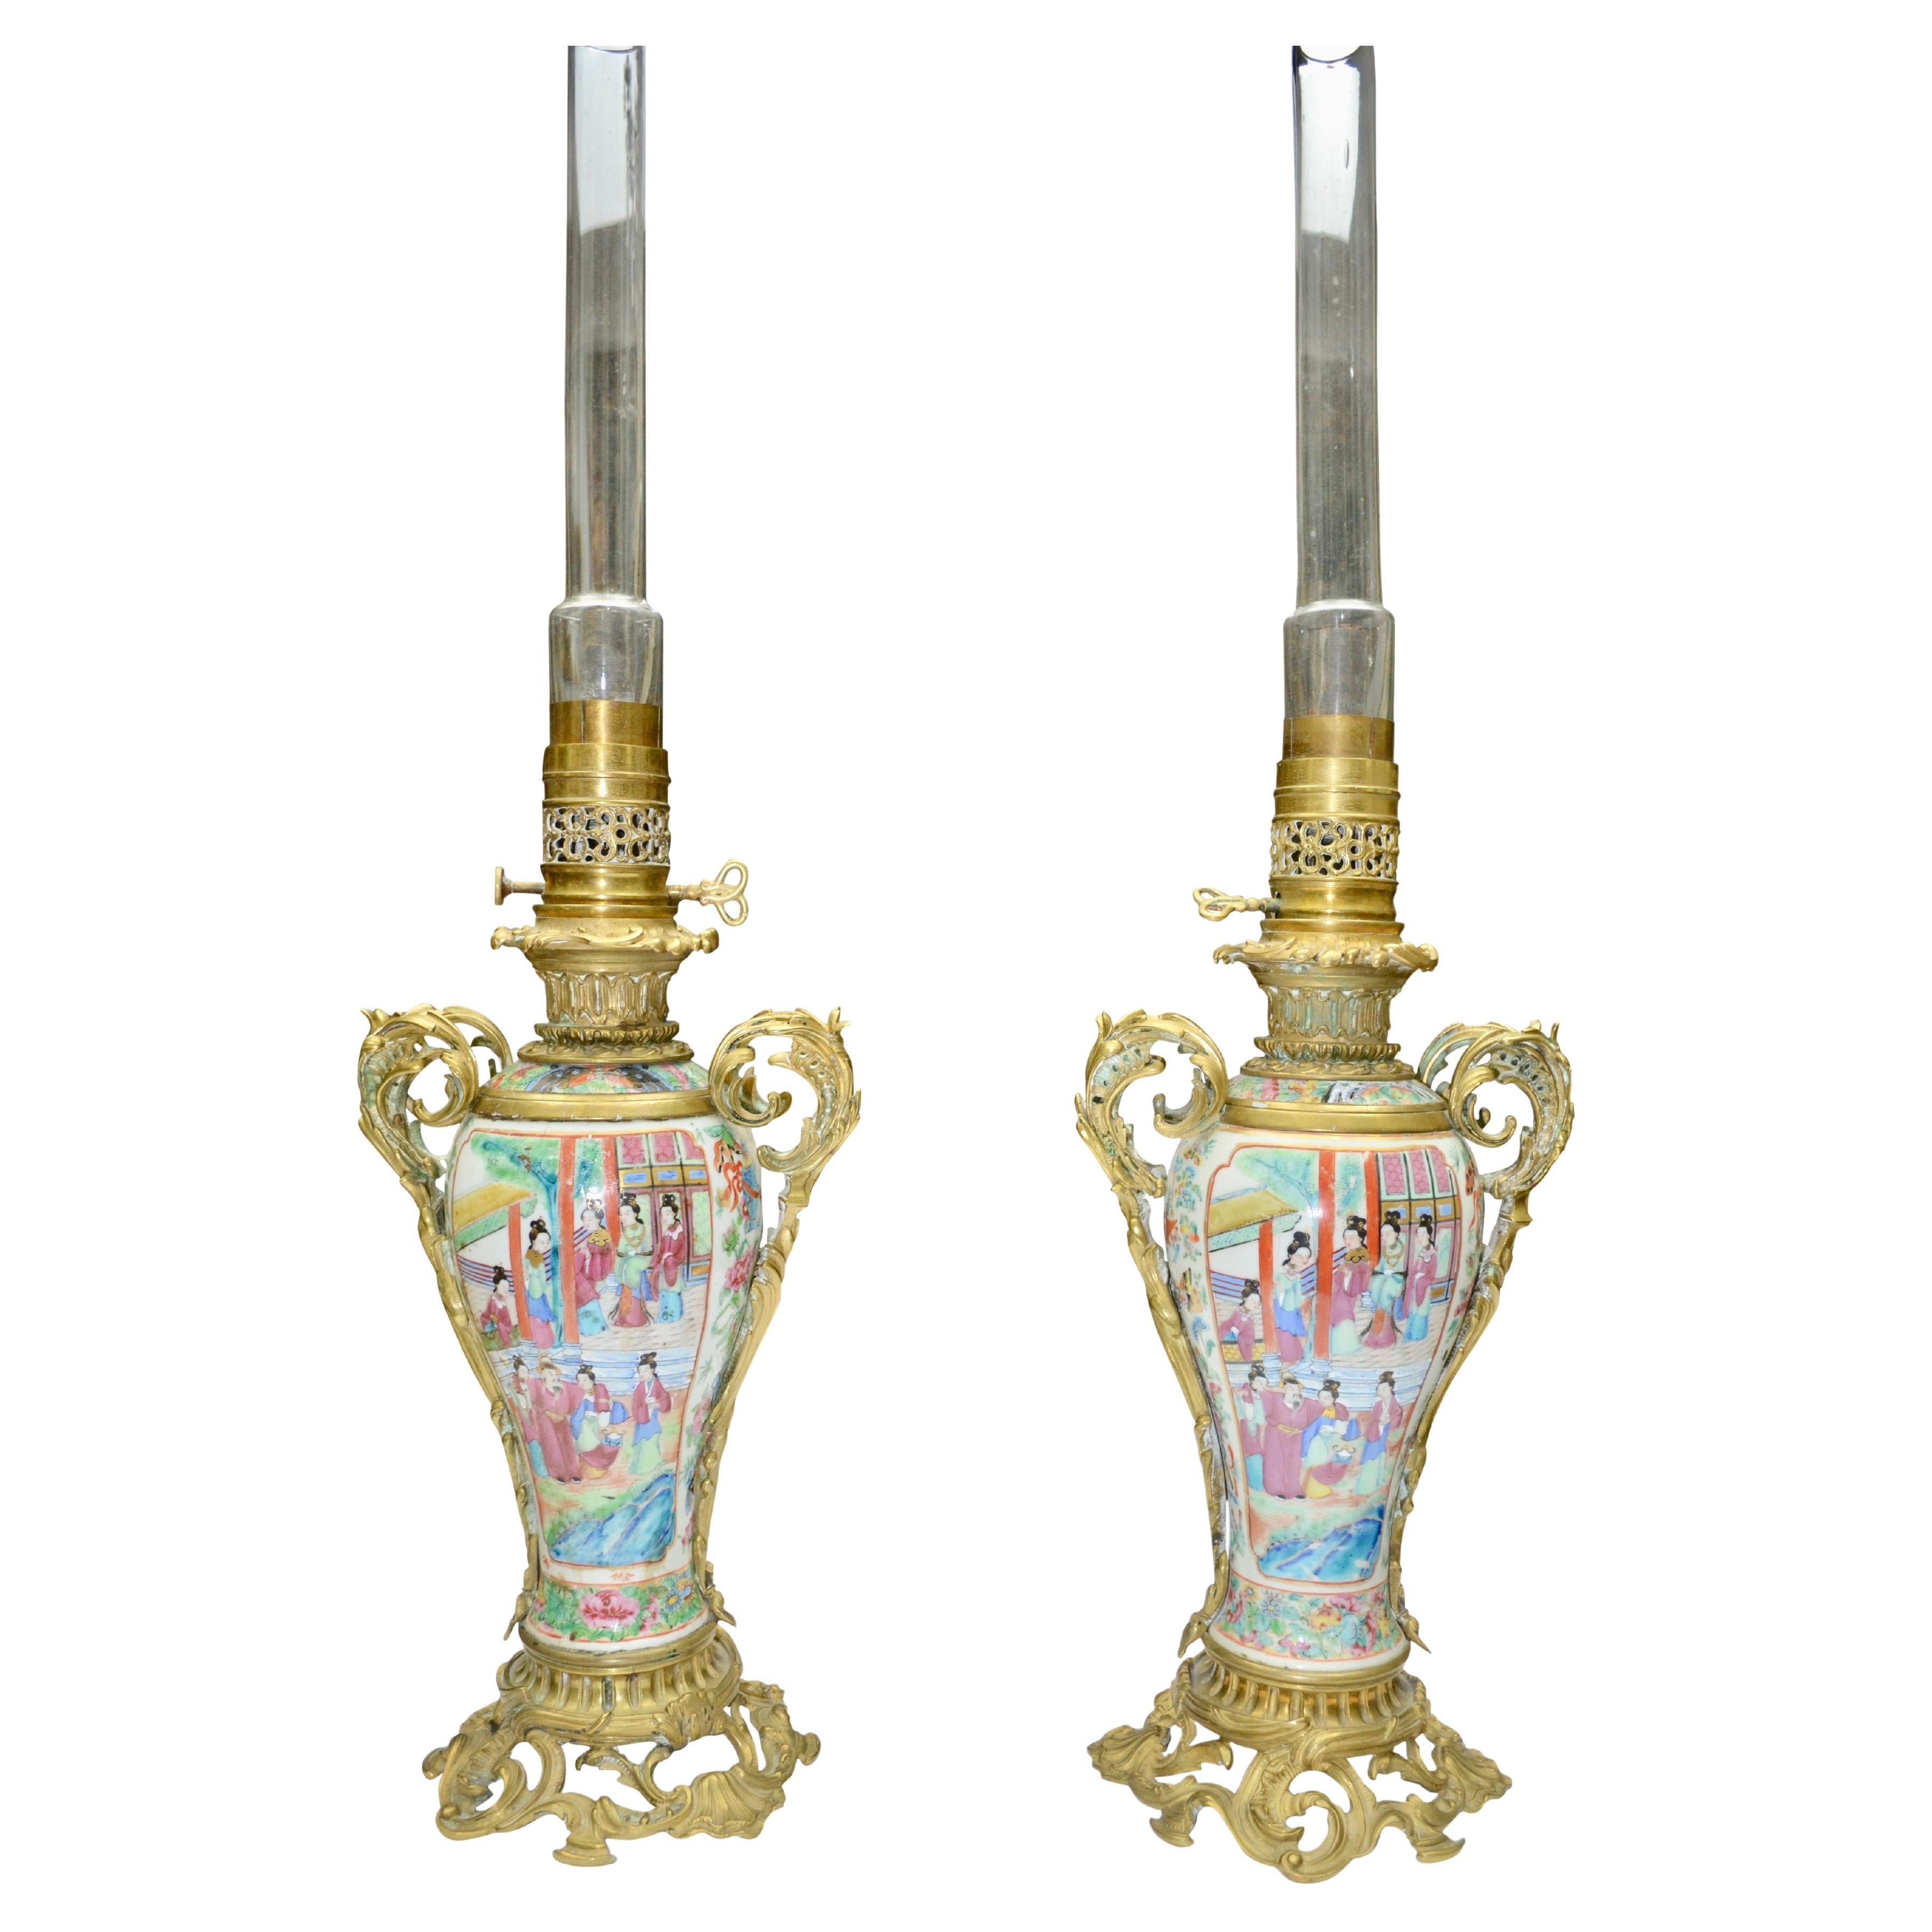 A beautiful French and Asian collaboration of a 19th century pair of Napoleon III Famille Rose porcelain gilt bronze and brass oil lamps that miraculously include the original glass tube shades. . The lamps are raised on an elegant round rococo